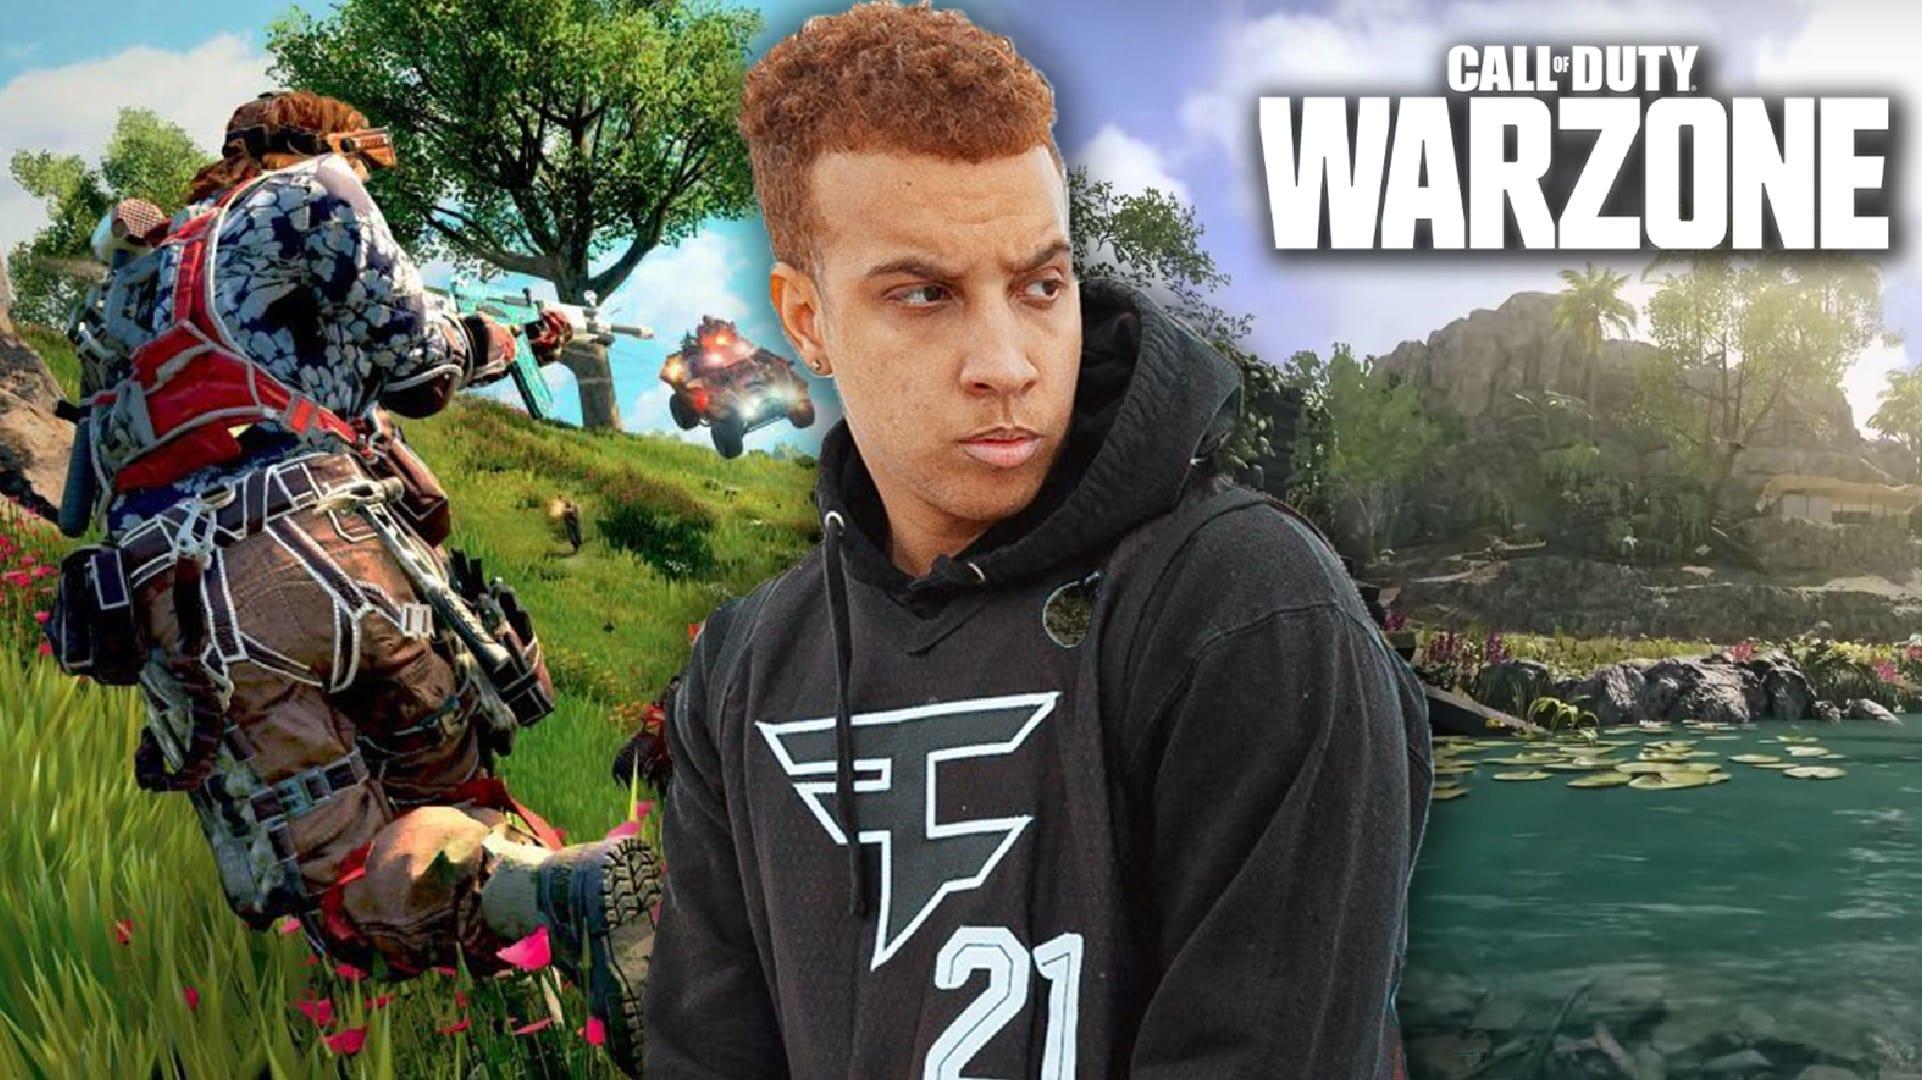 Swagg next to Warzone and Blackout gameplay